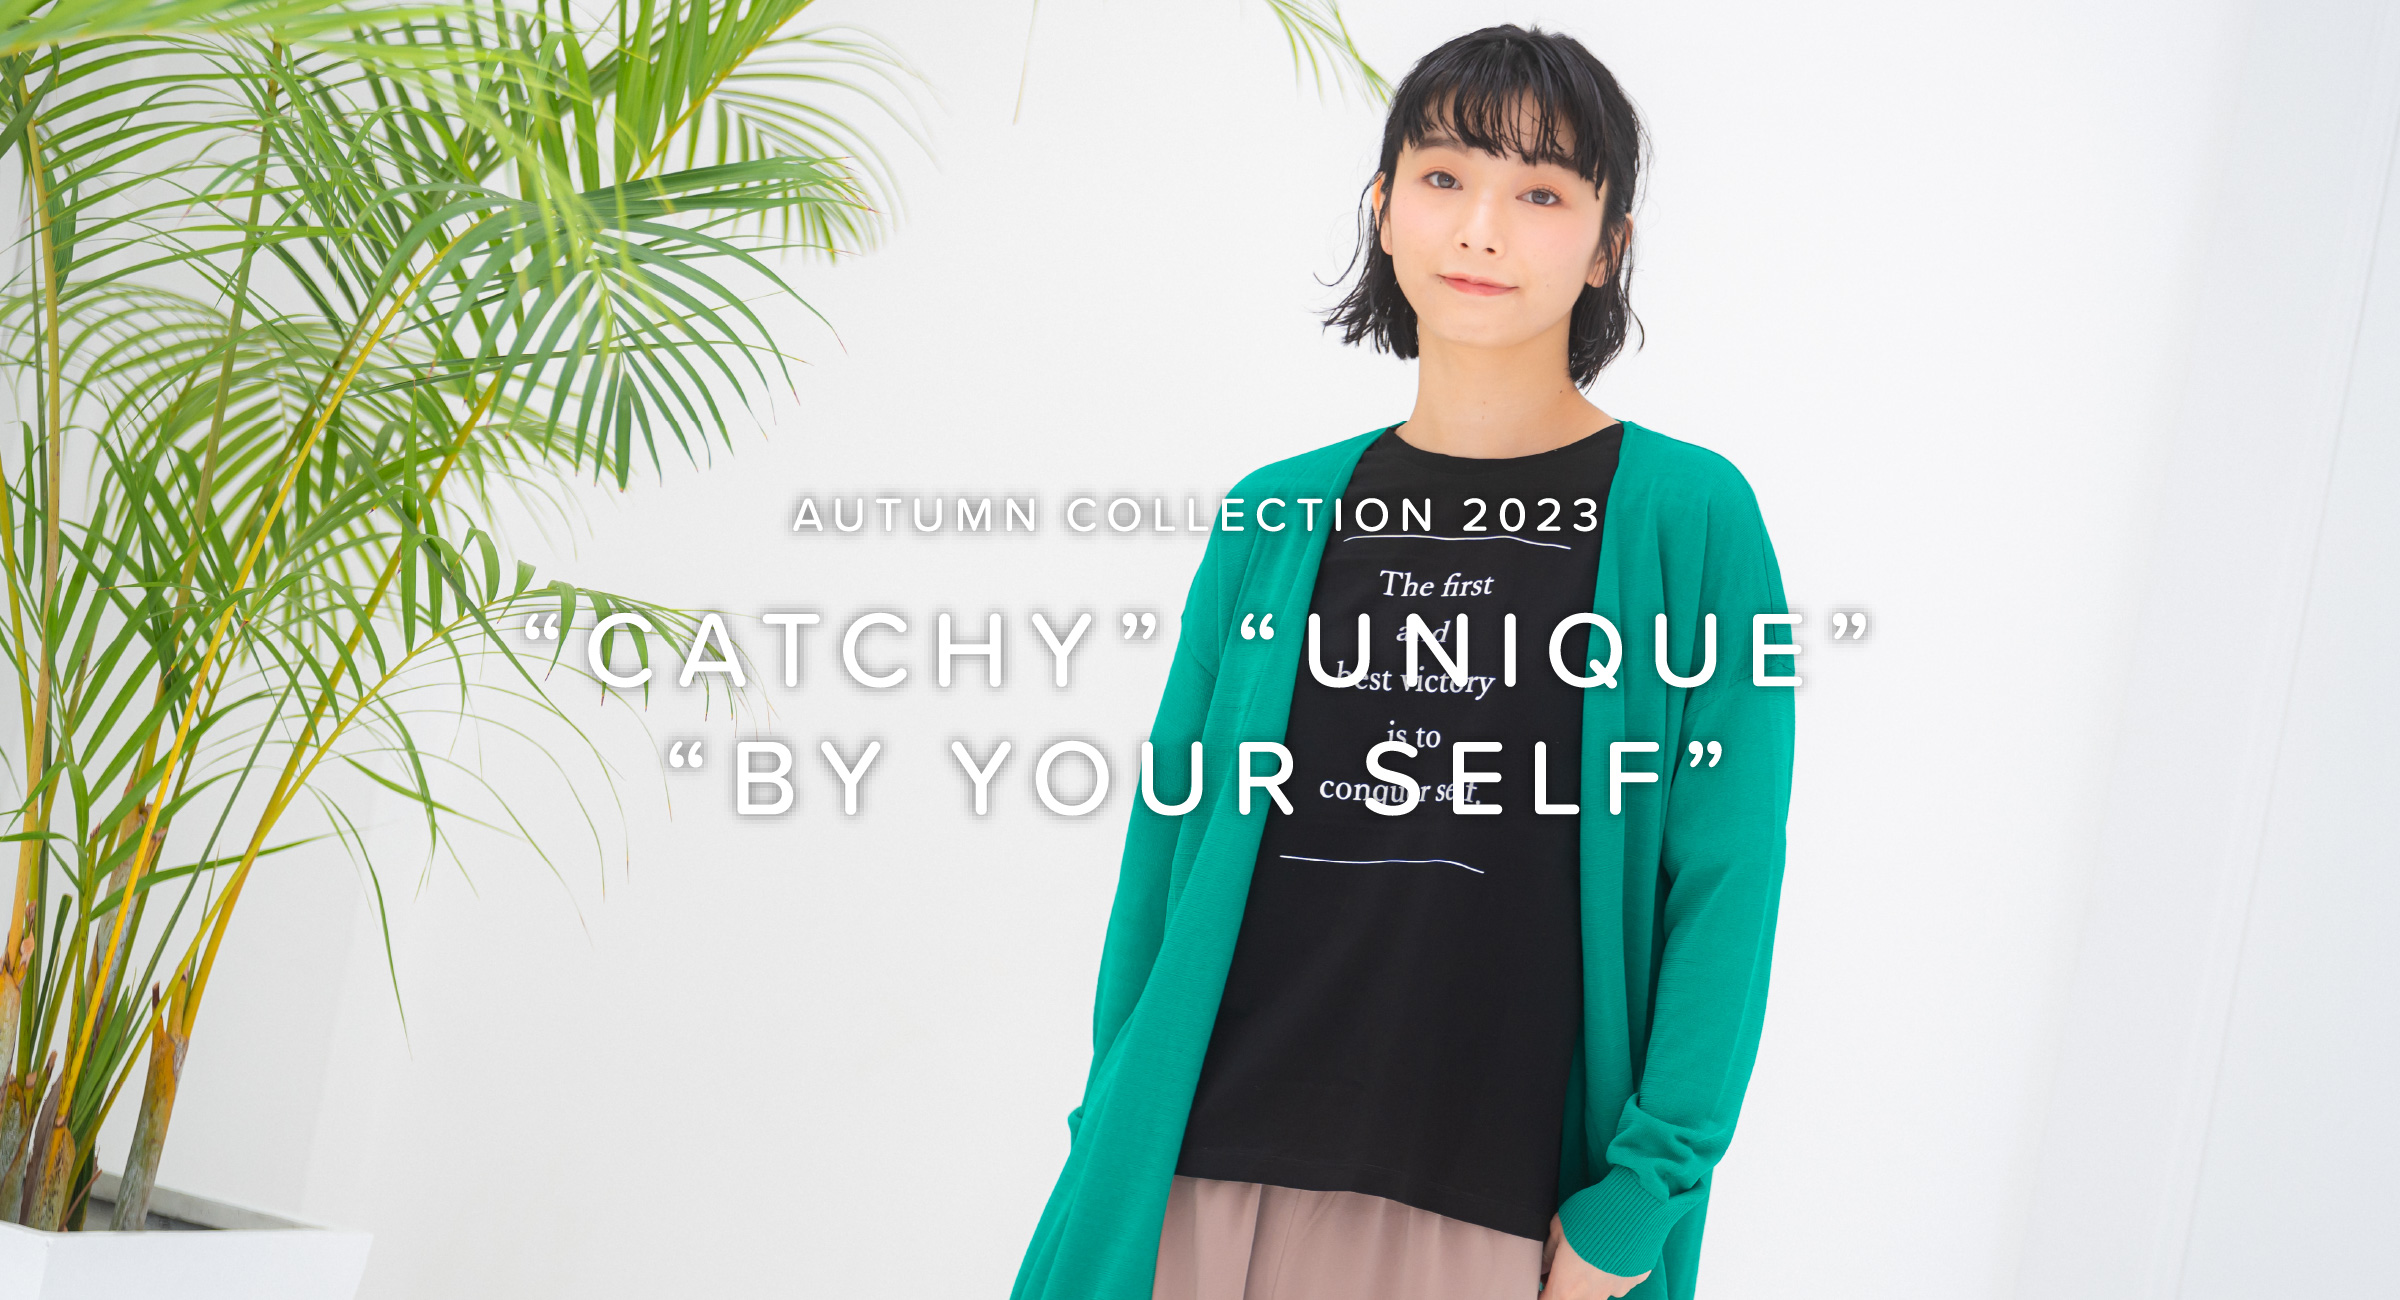 AUTUMN COLLECTION 2023 “CATCHY”“UNIQUE” “BY YOUR SELF”